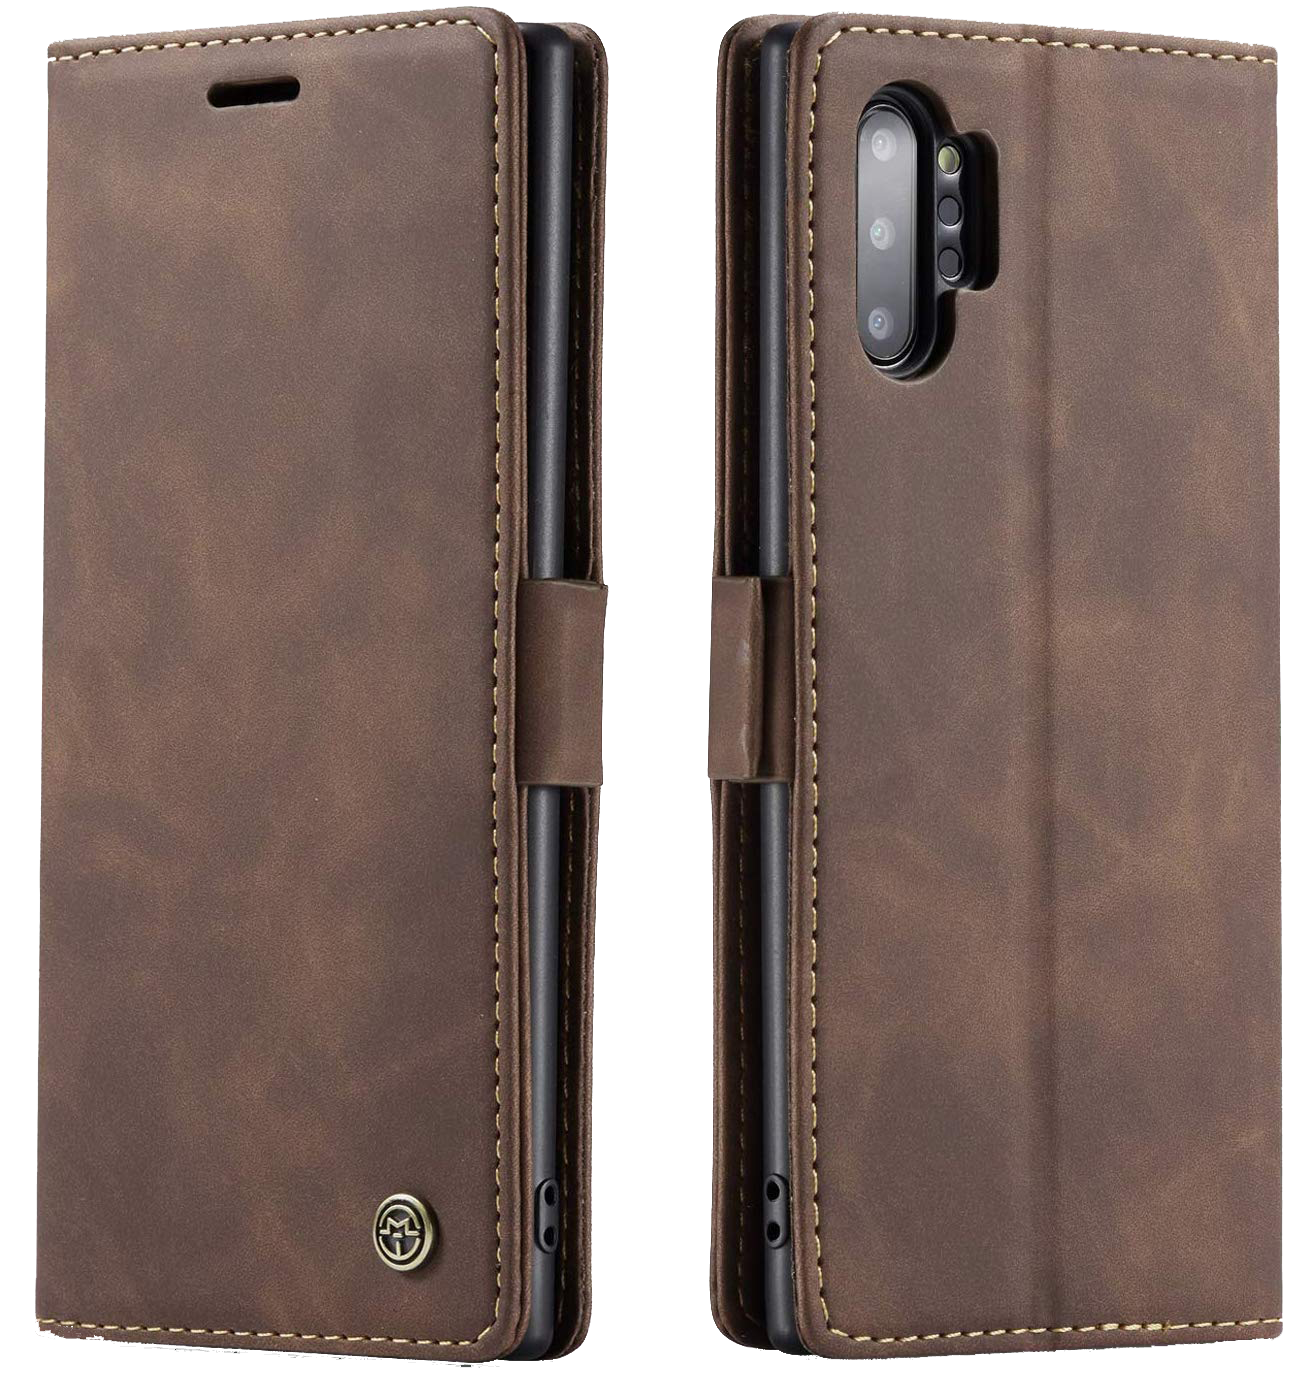 Samsung Galaxy Note 10 Plus coffee color leather wallet flip cover case By excelsior